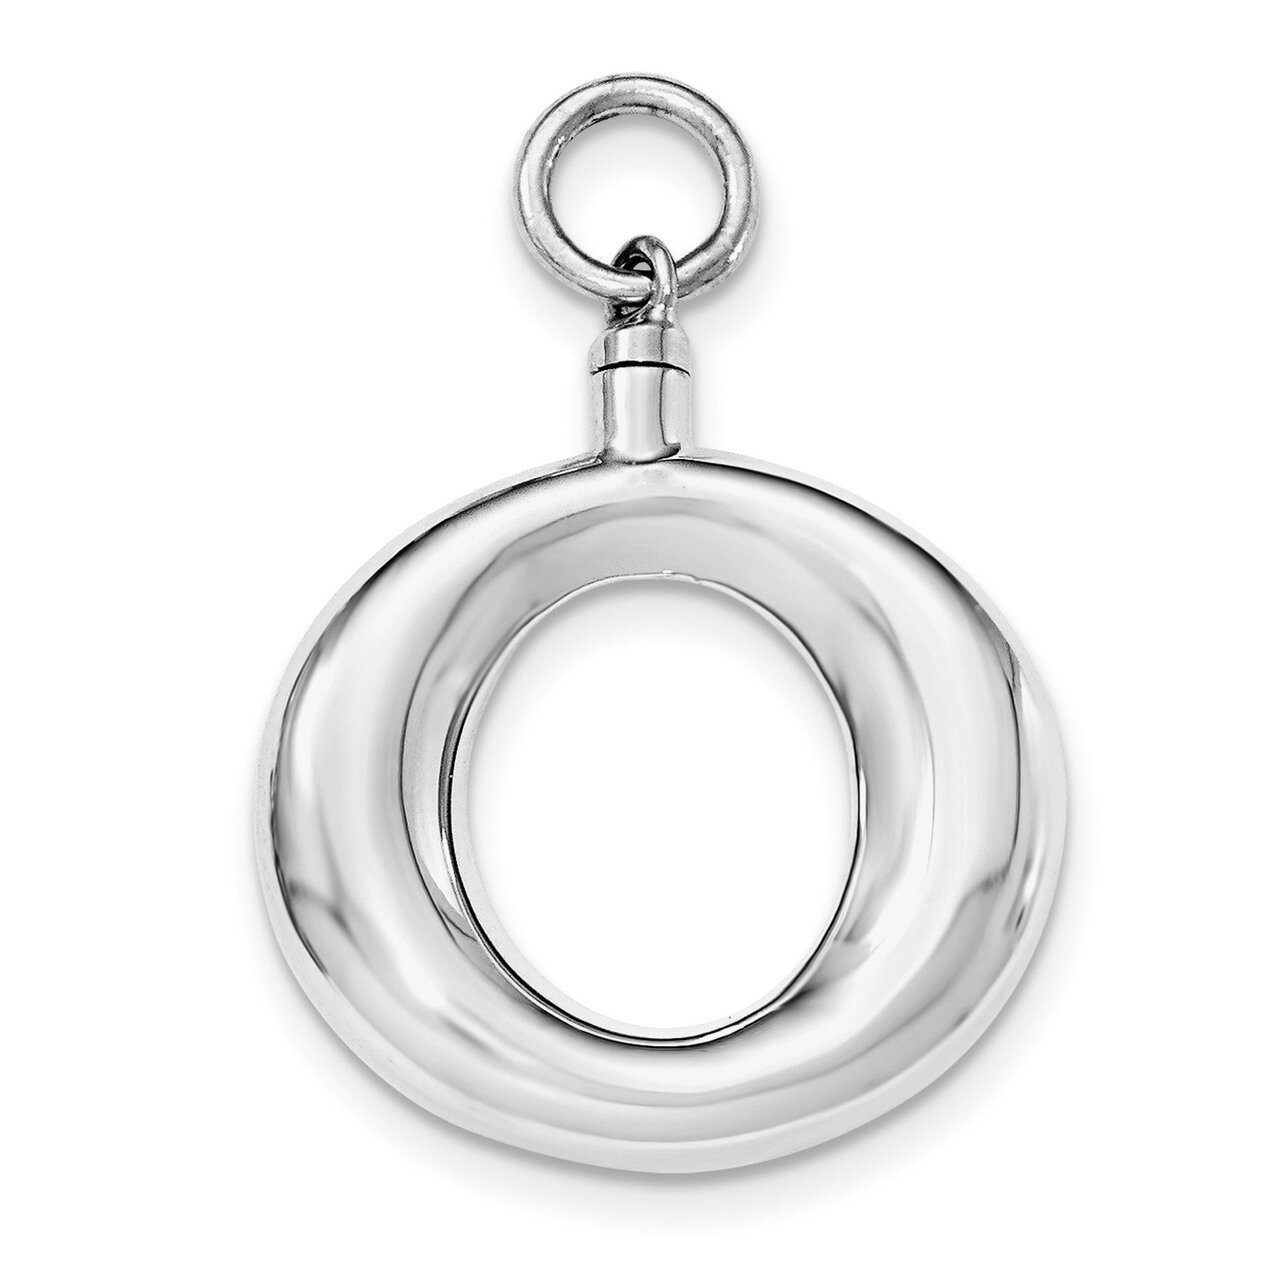 Round Ash Holder Pendant Sterling Silver Rhodium-plated Polished QC8403